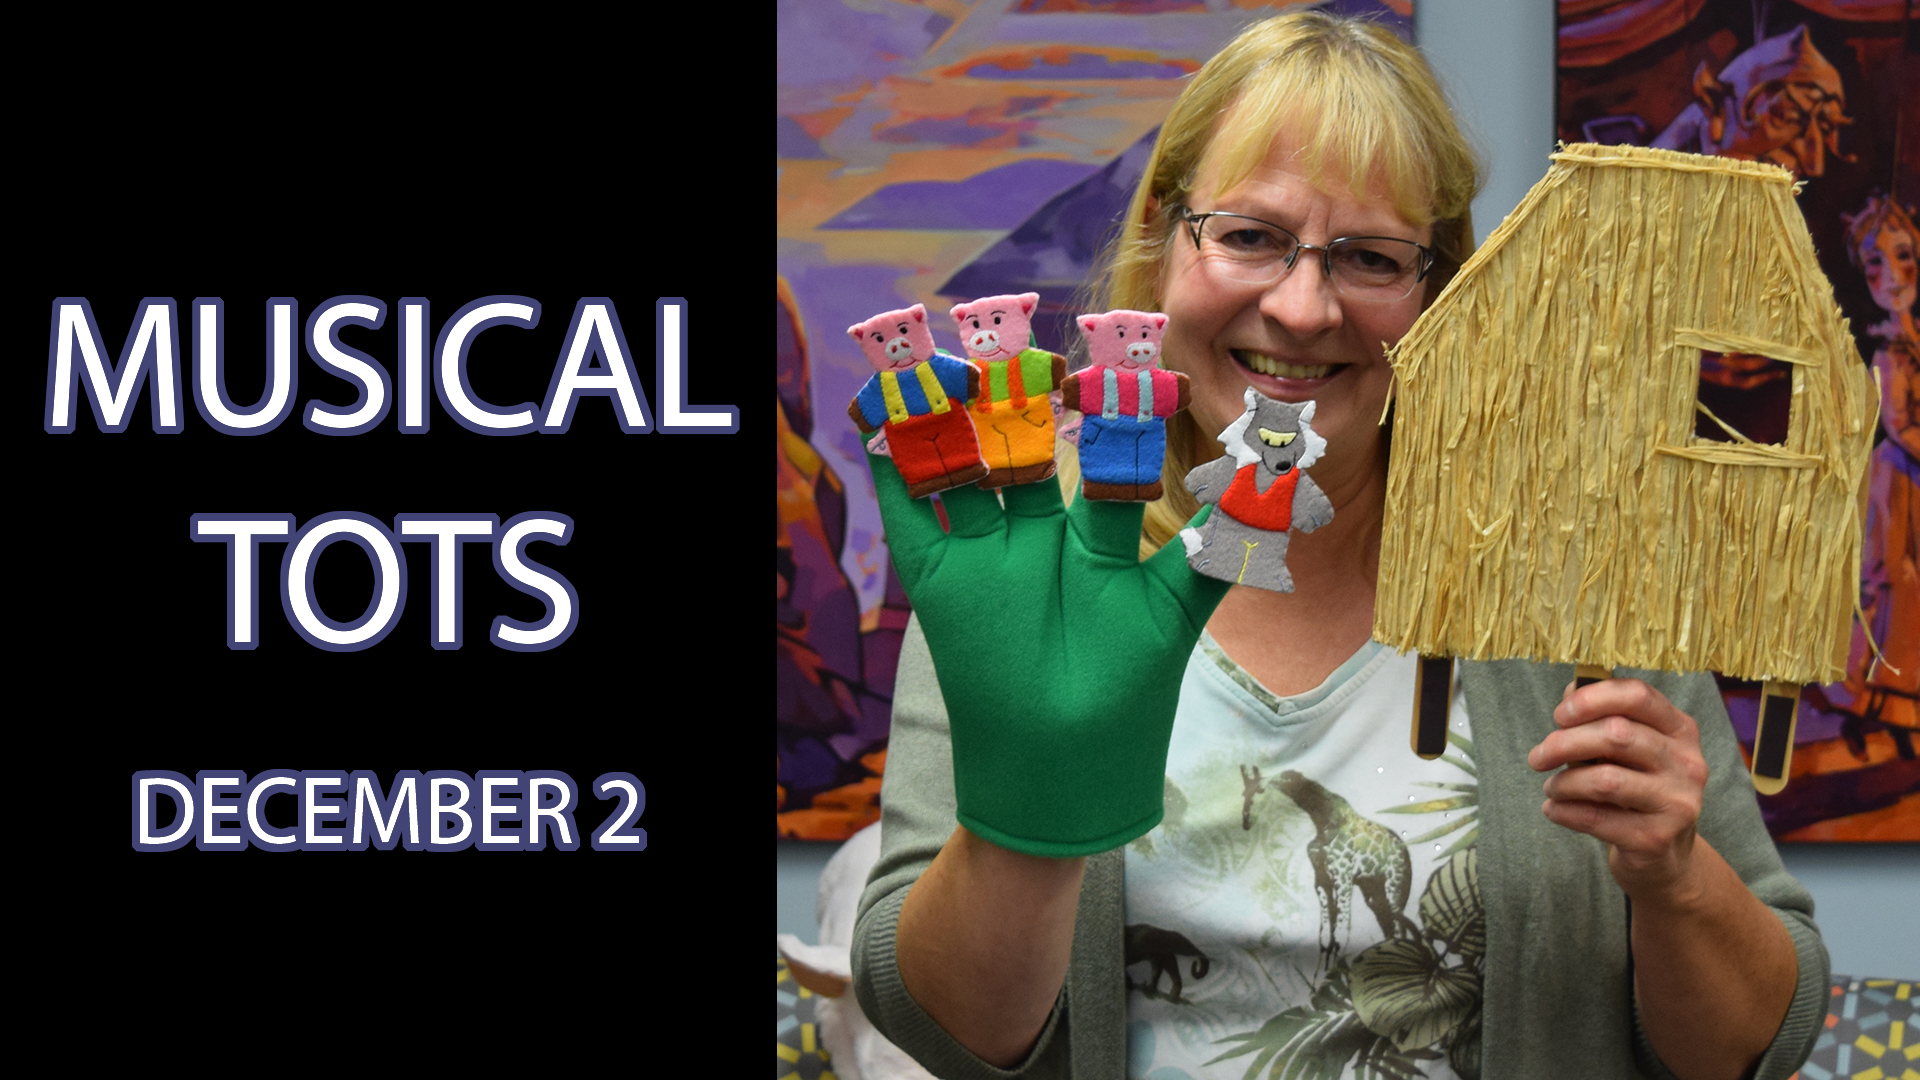 A woman holds pig and wolf puppets next to a popsicle stick house and the text "Musical Tots December 2"